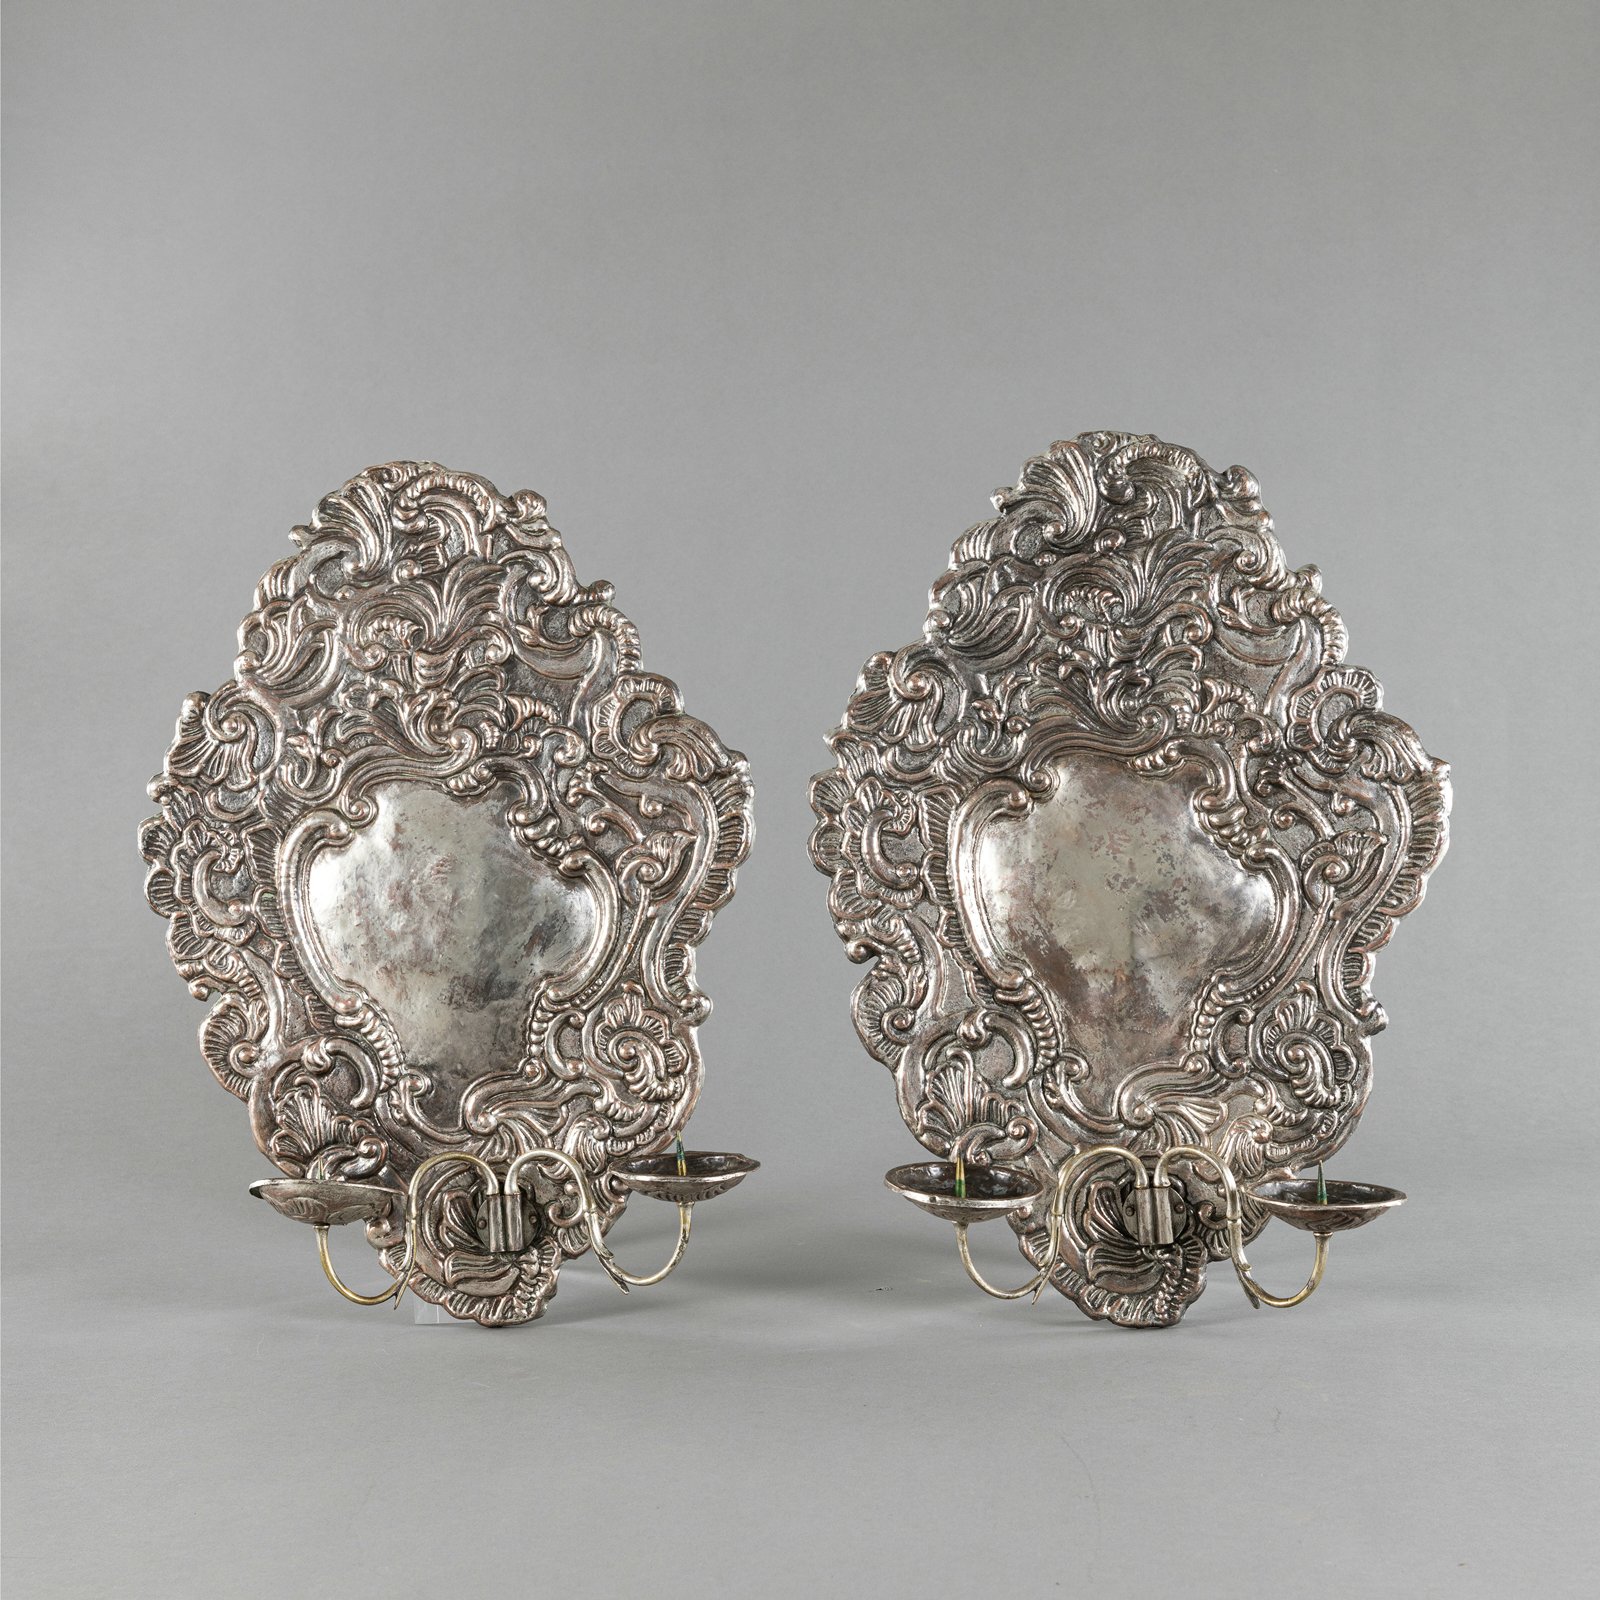 A PAIR OF COPPERPLATE ROCOCO WALL LIGHTS